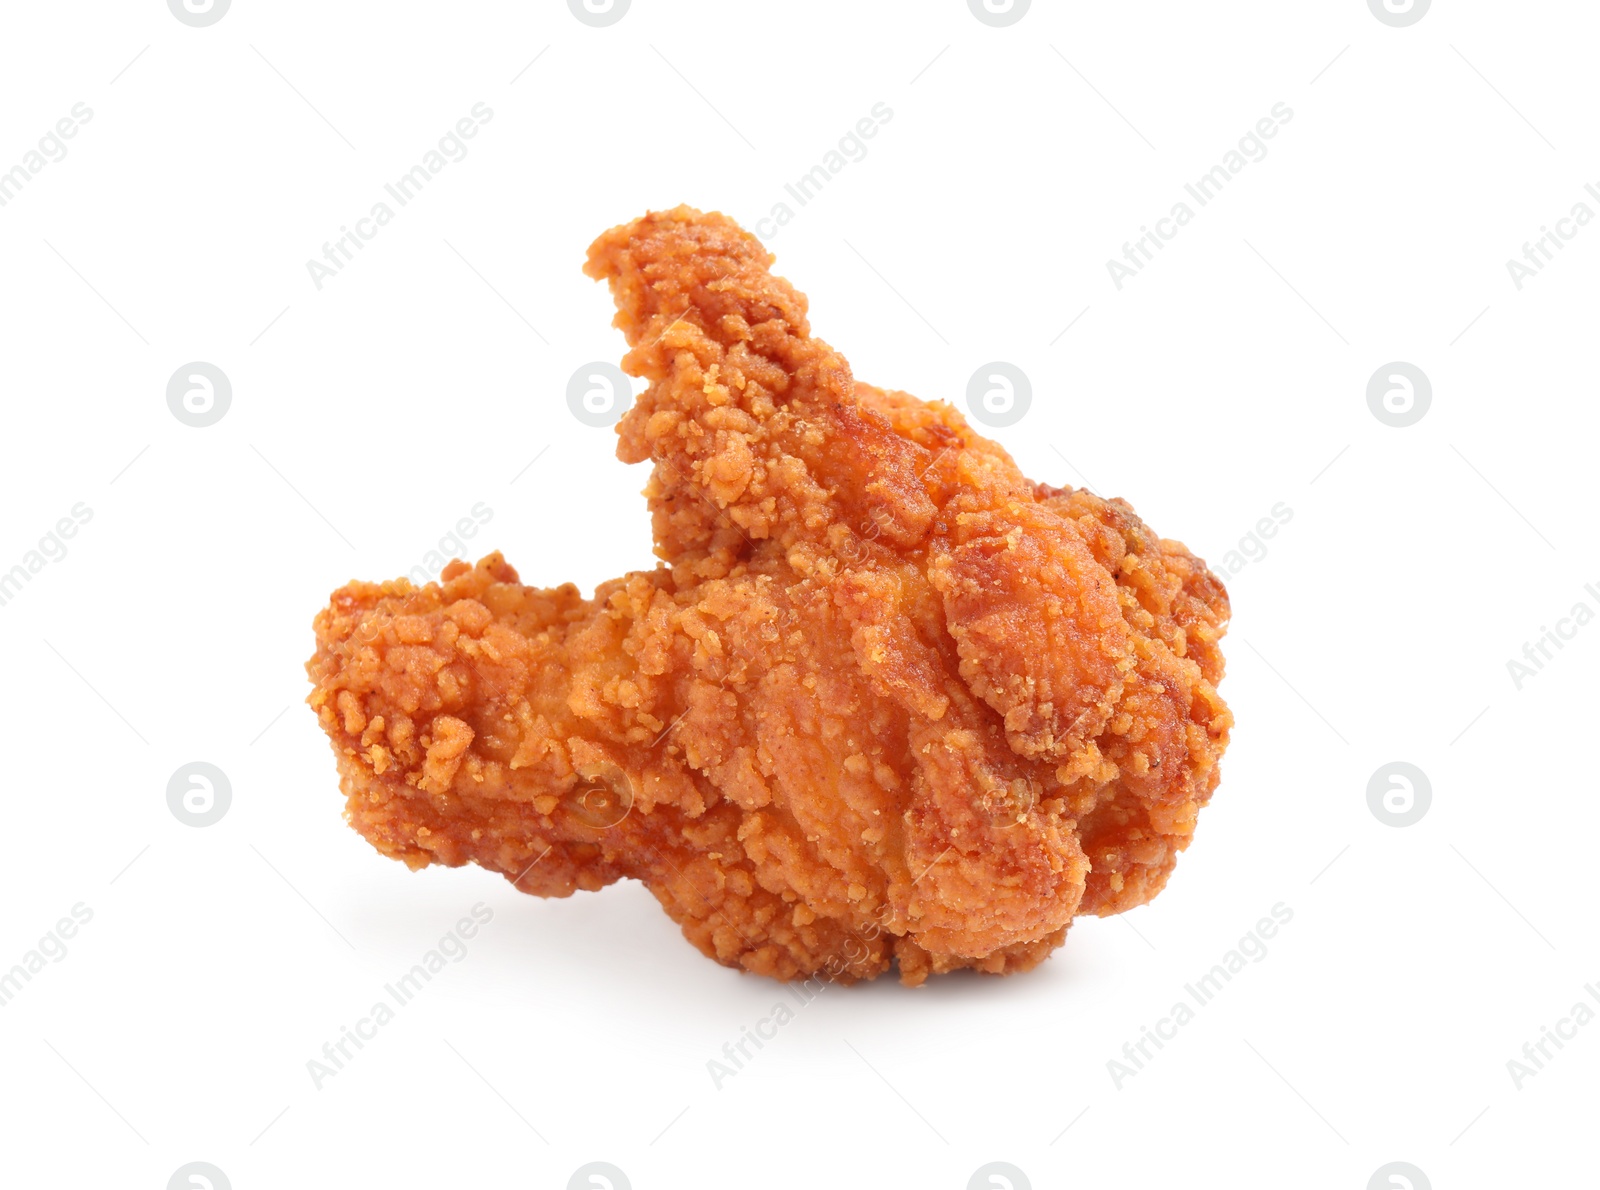 Photo of Tasty deep fried chicken pieces isolated on white